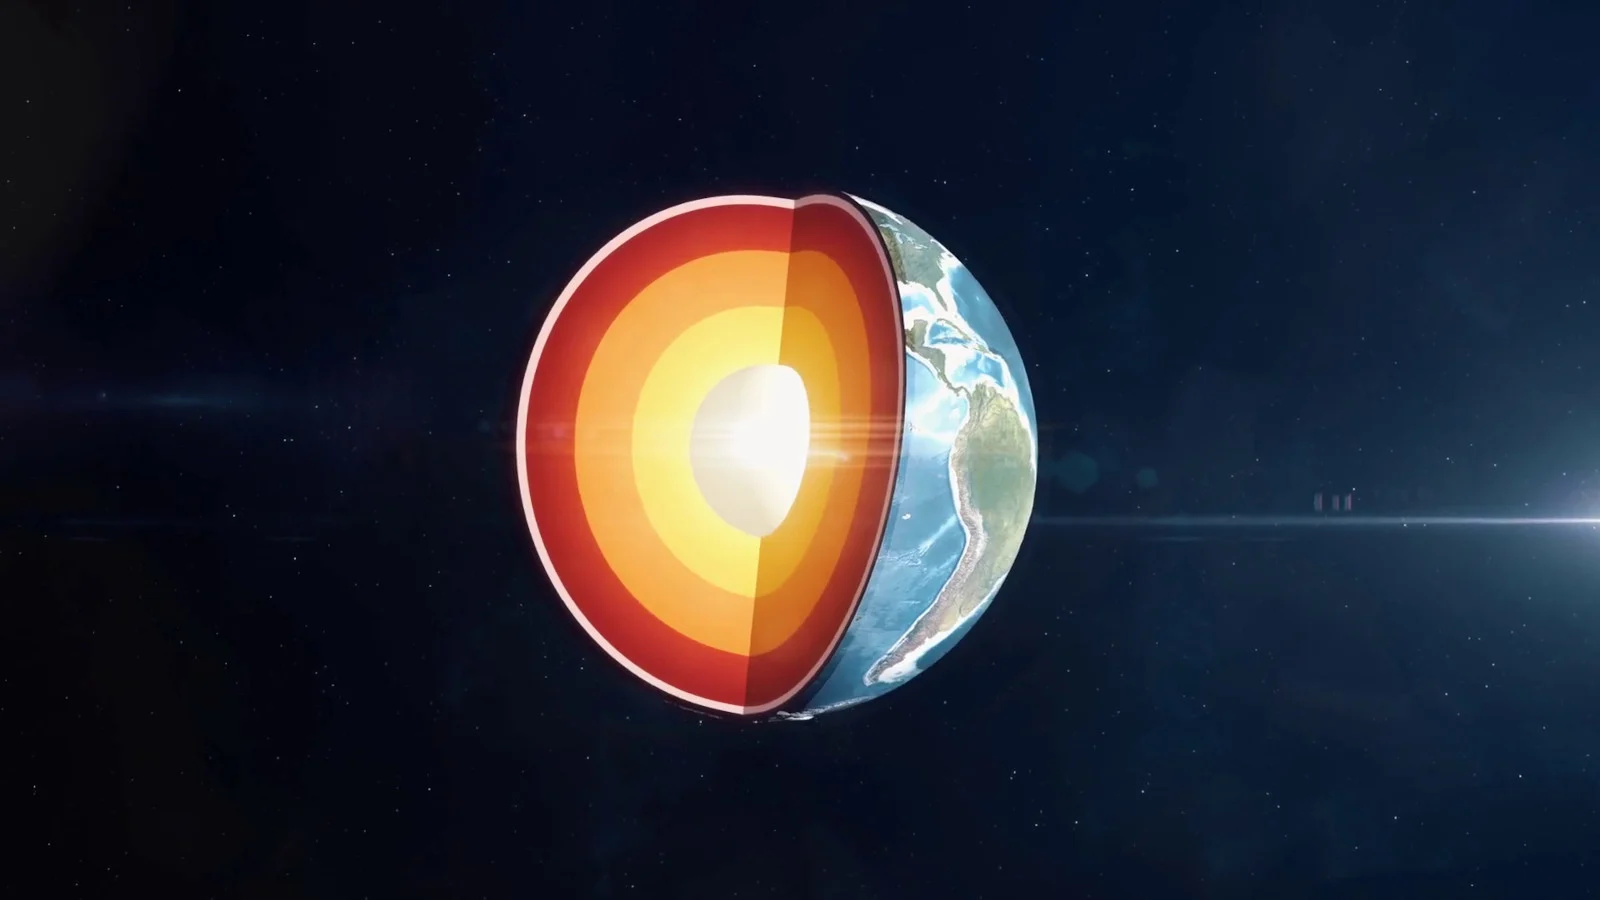 Earth's core appears to have reversed its spin. So what does this mean?